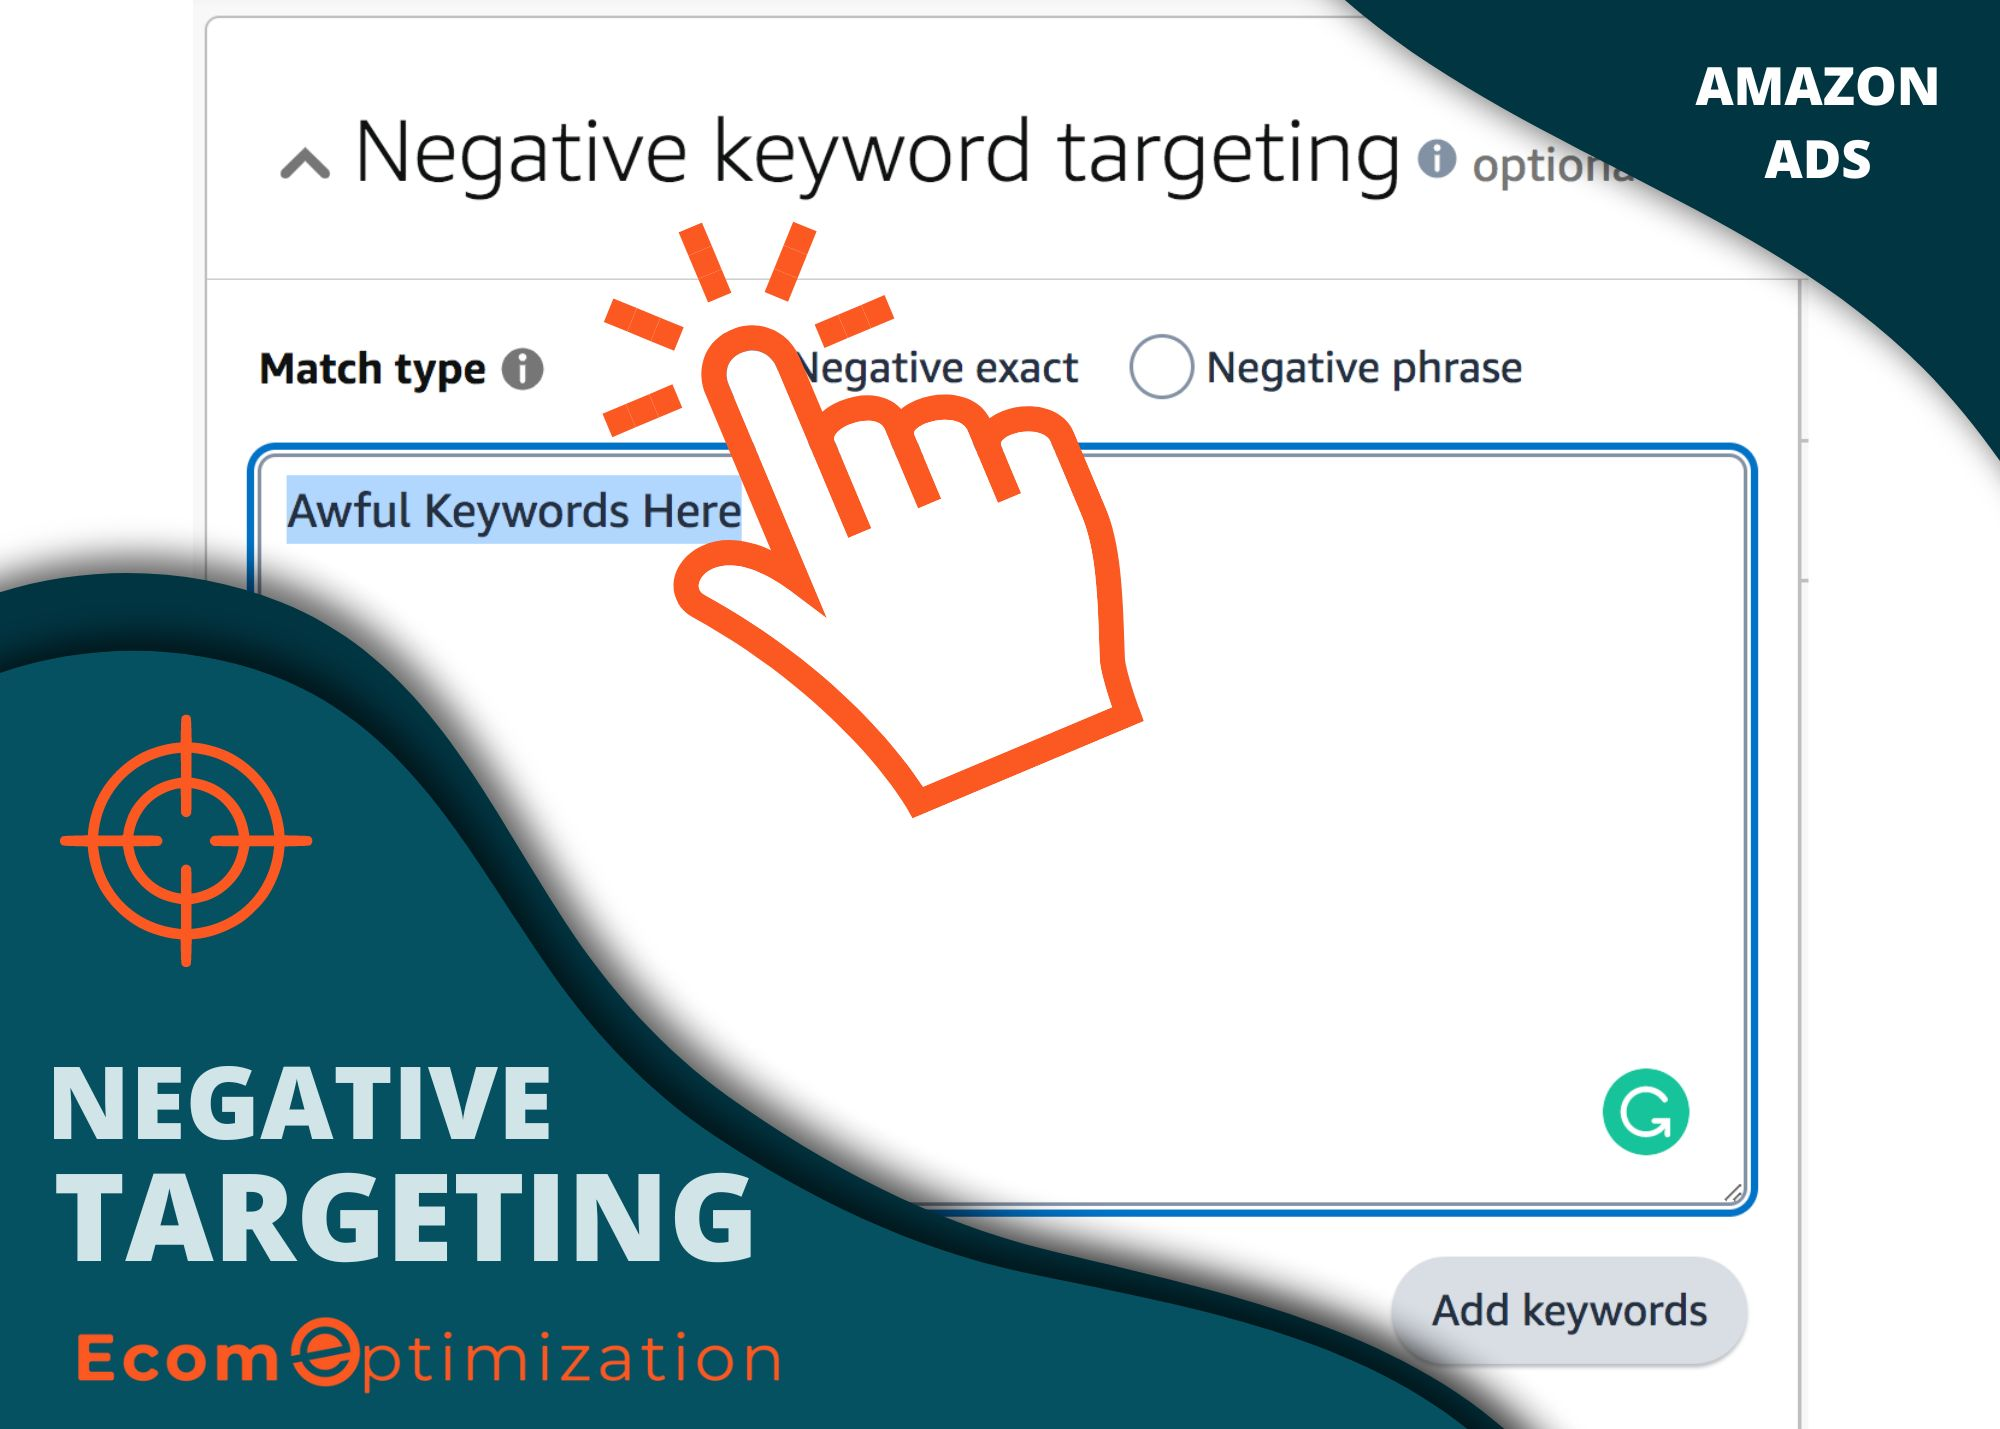 Amazon Ads Negative Keyword and Product Targeting Infographic